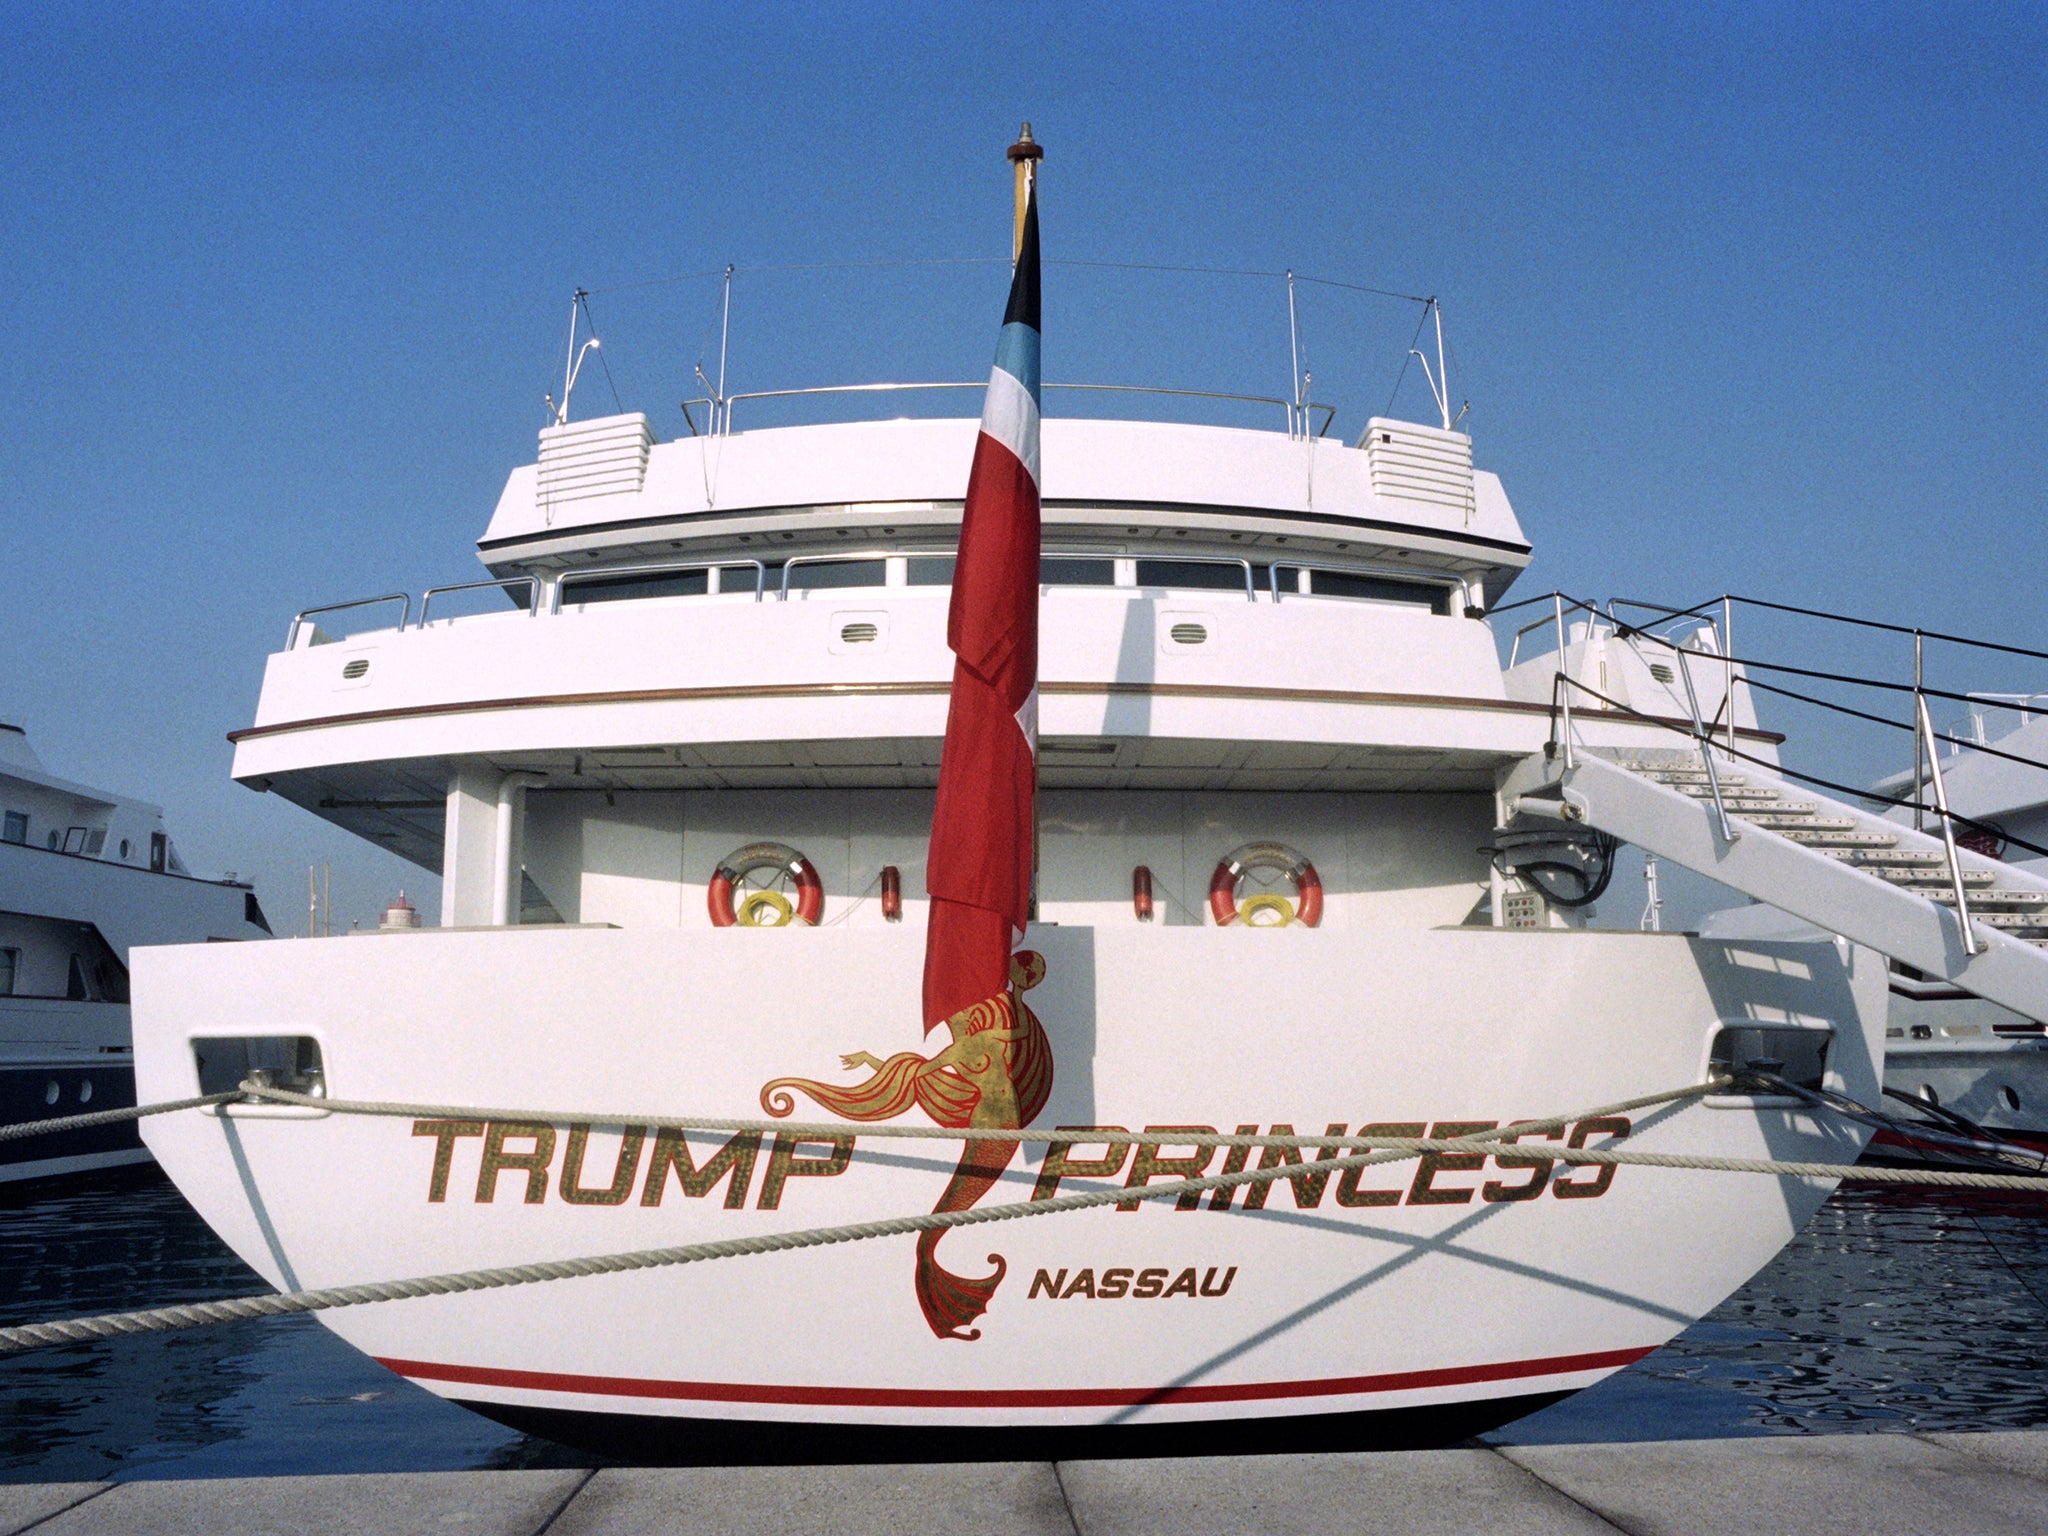 Donald Trump later renamed the yacht